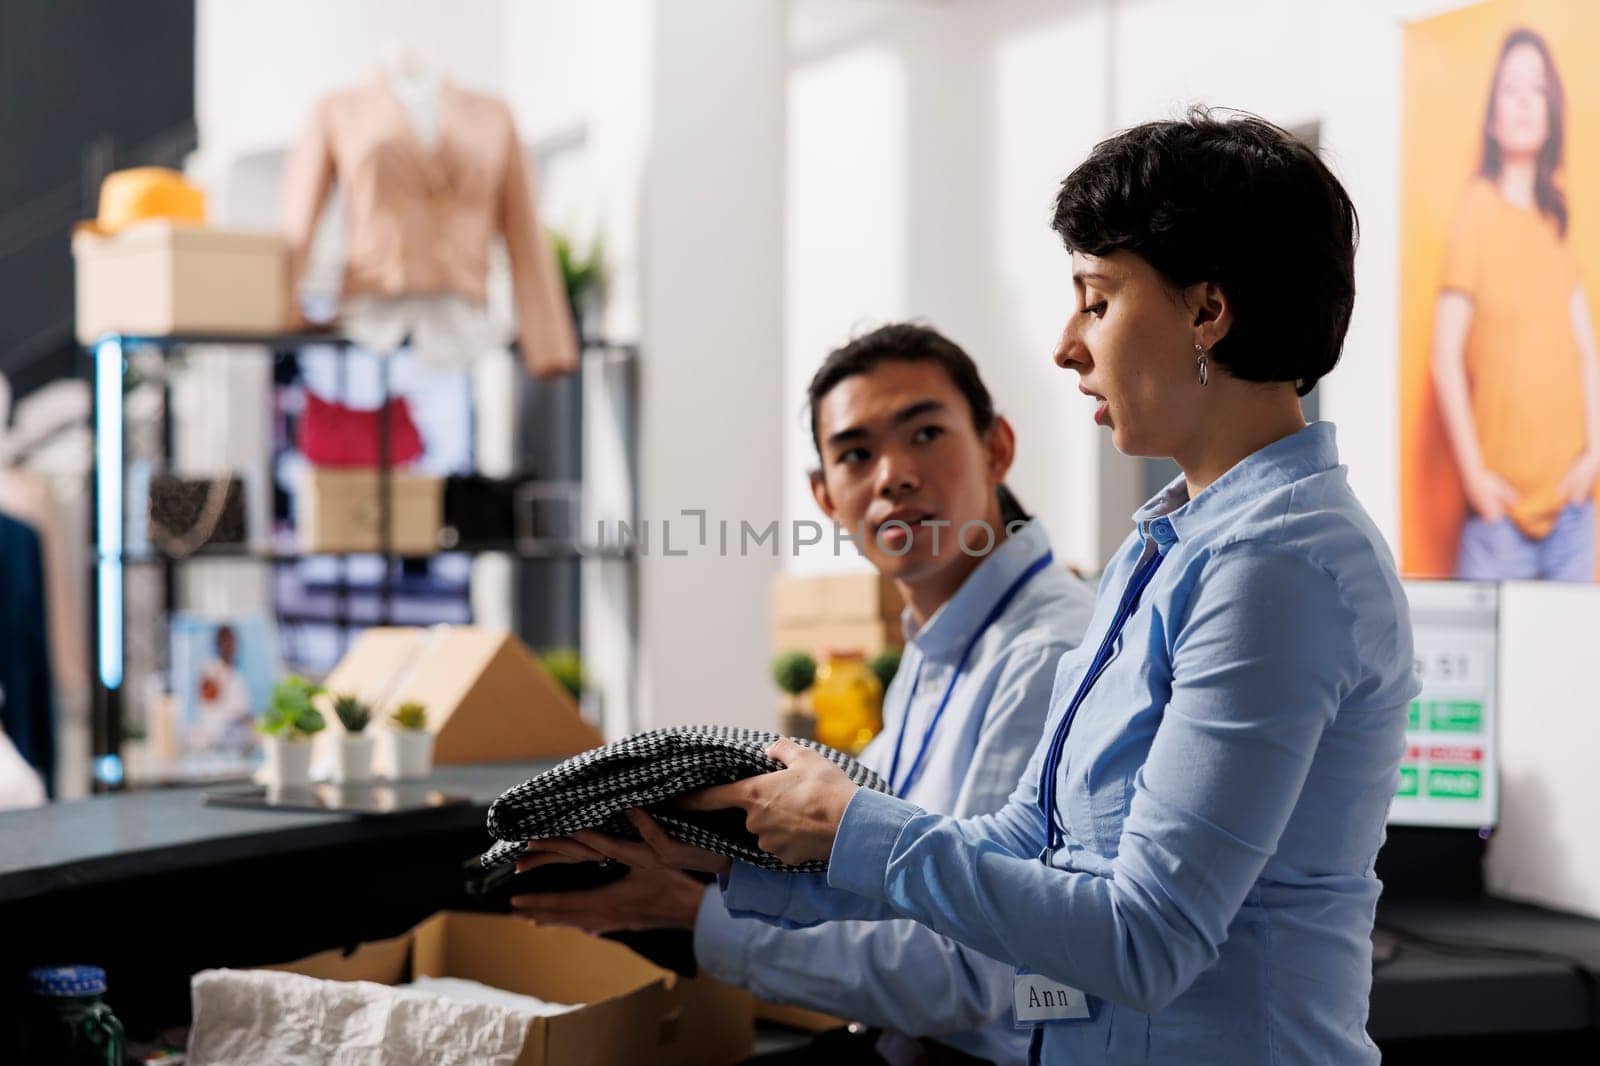 Store workers standing at counter desk, preparing packages for delivery in modern boutique. Woman putting stylish clothes in cardboard boxes, discussing shipping report with coworker in shopping mall